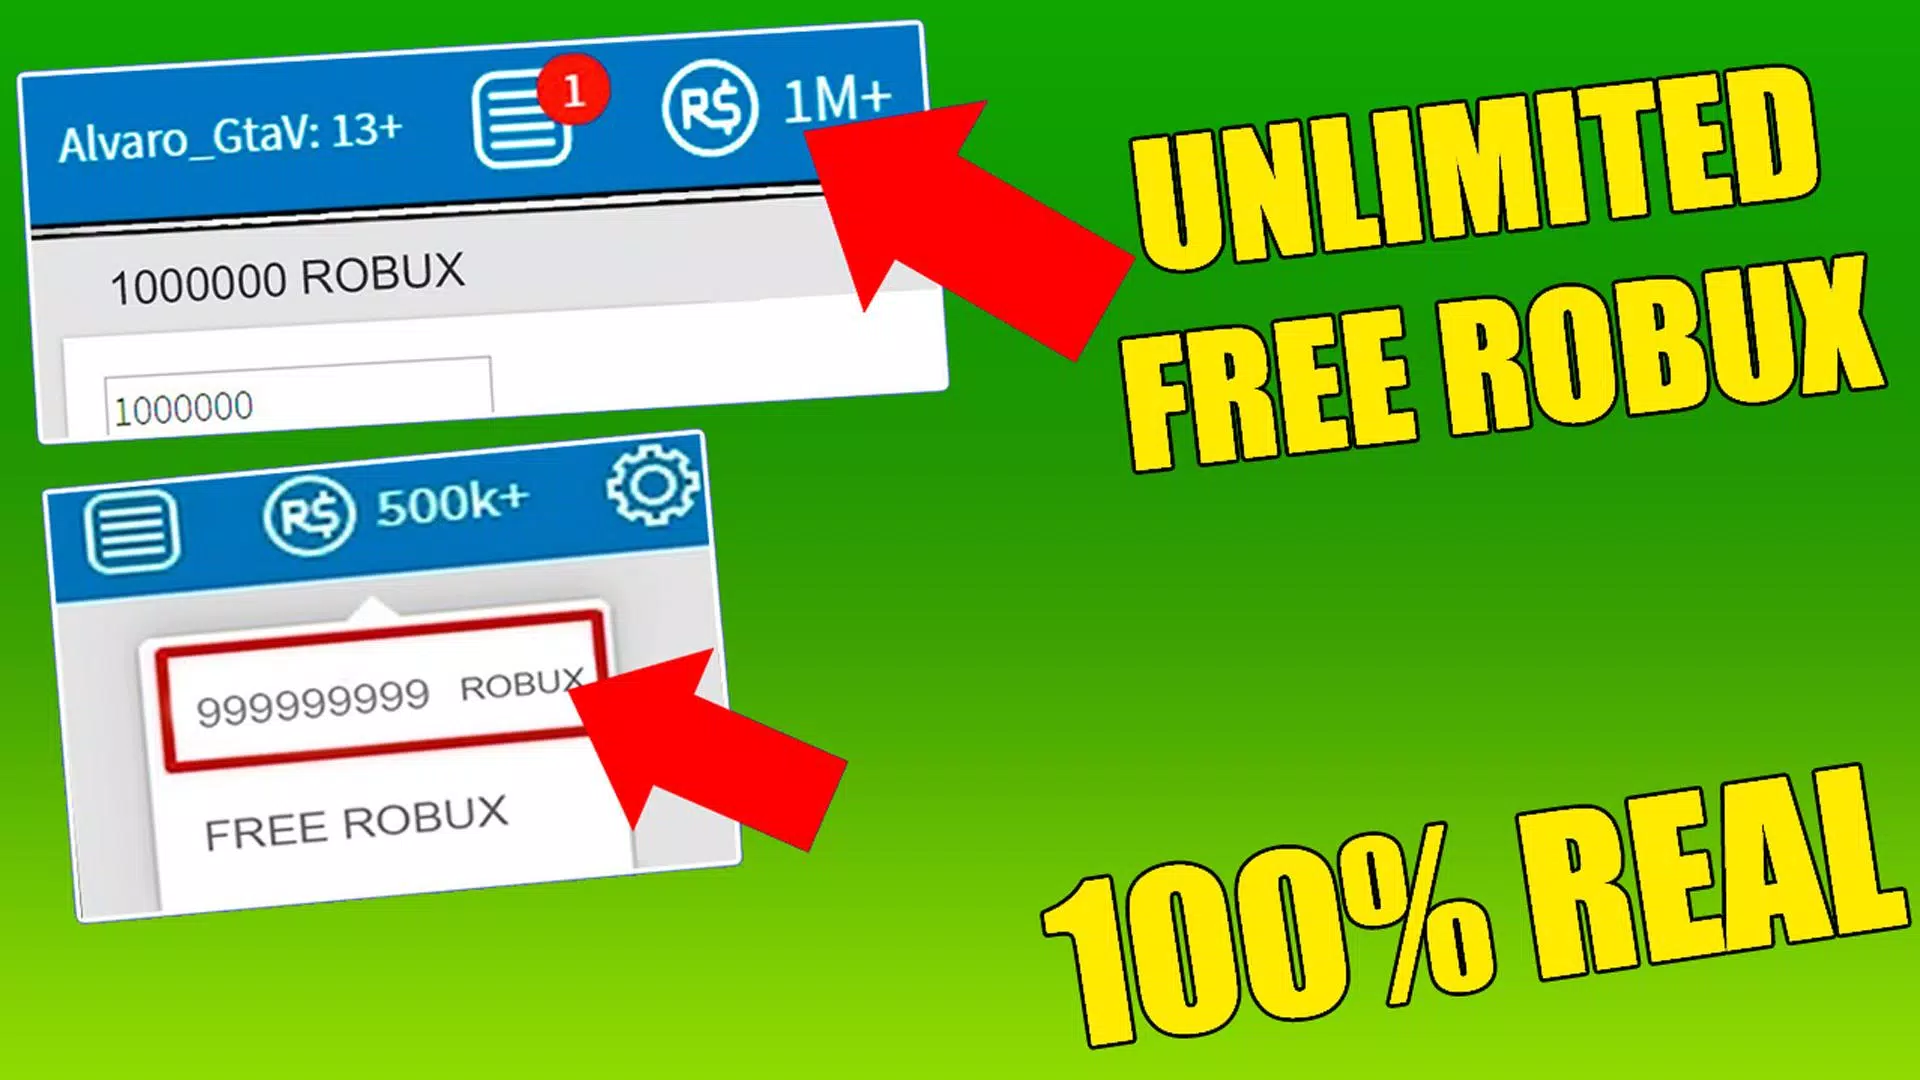 Download do APK de Get Free Robux l Free Robux Latest Tips para Android